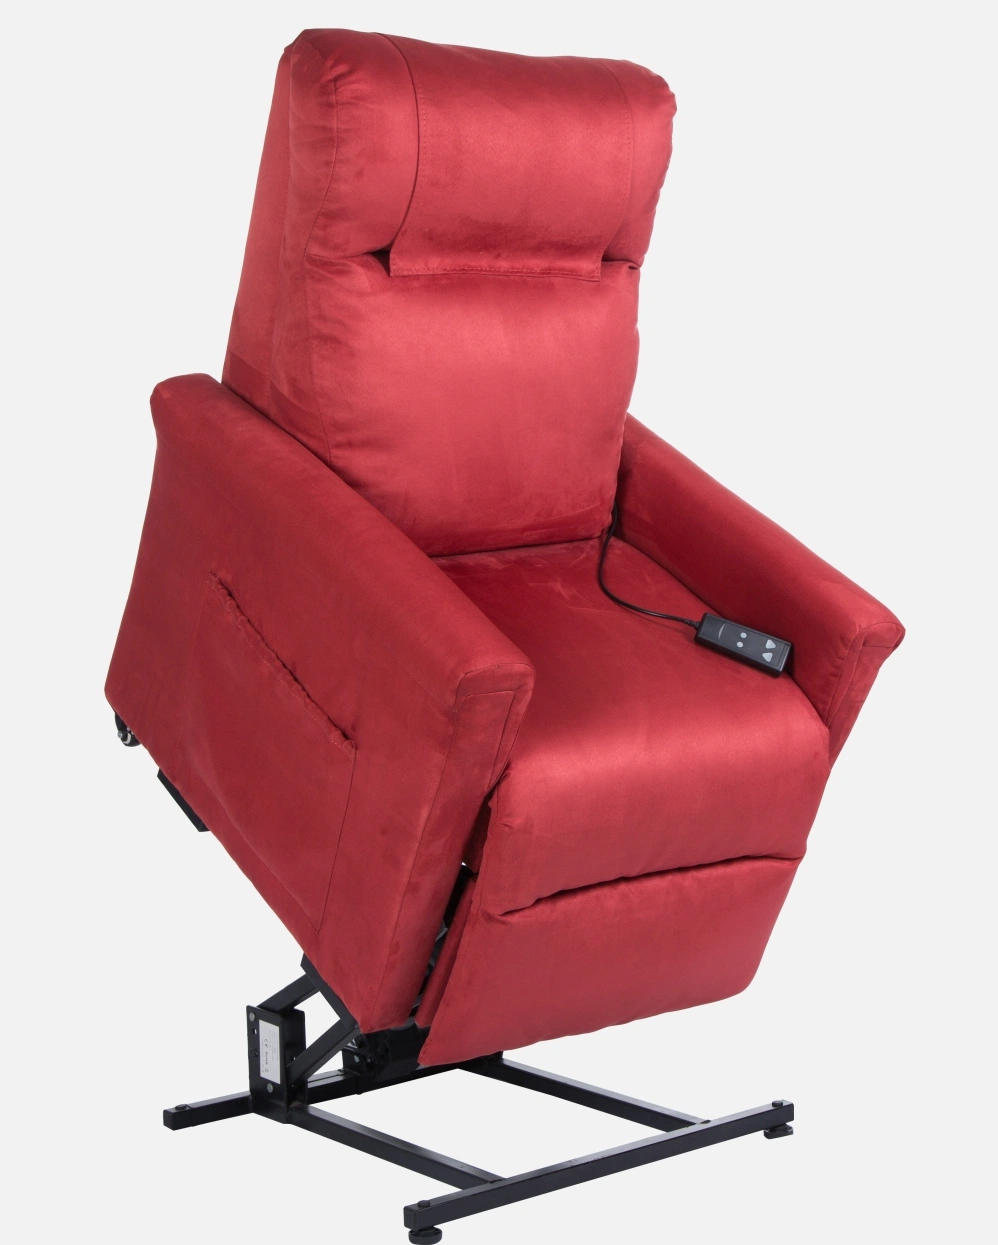 Healthcare Furniture Manufacturers Adjustable Sofa Maxicomforter Power Lift Recliner Chair for Elderly with Massage